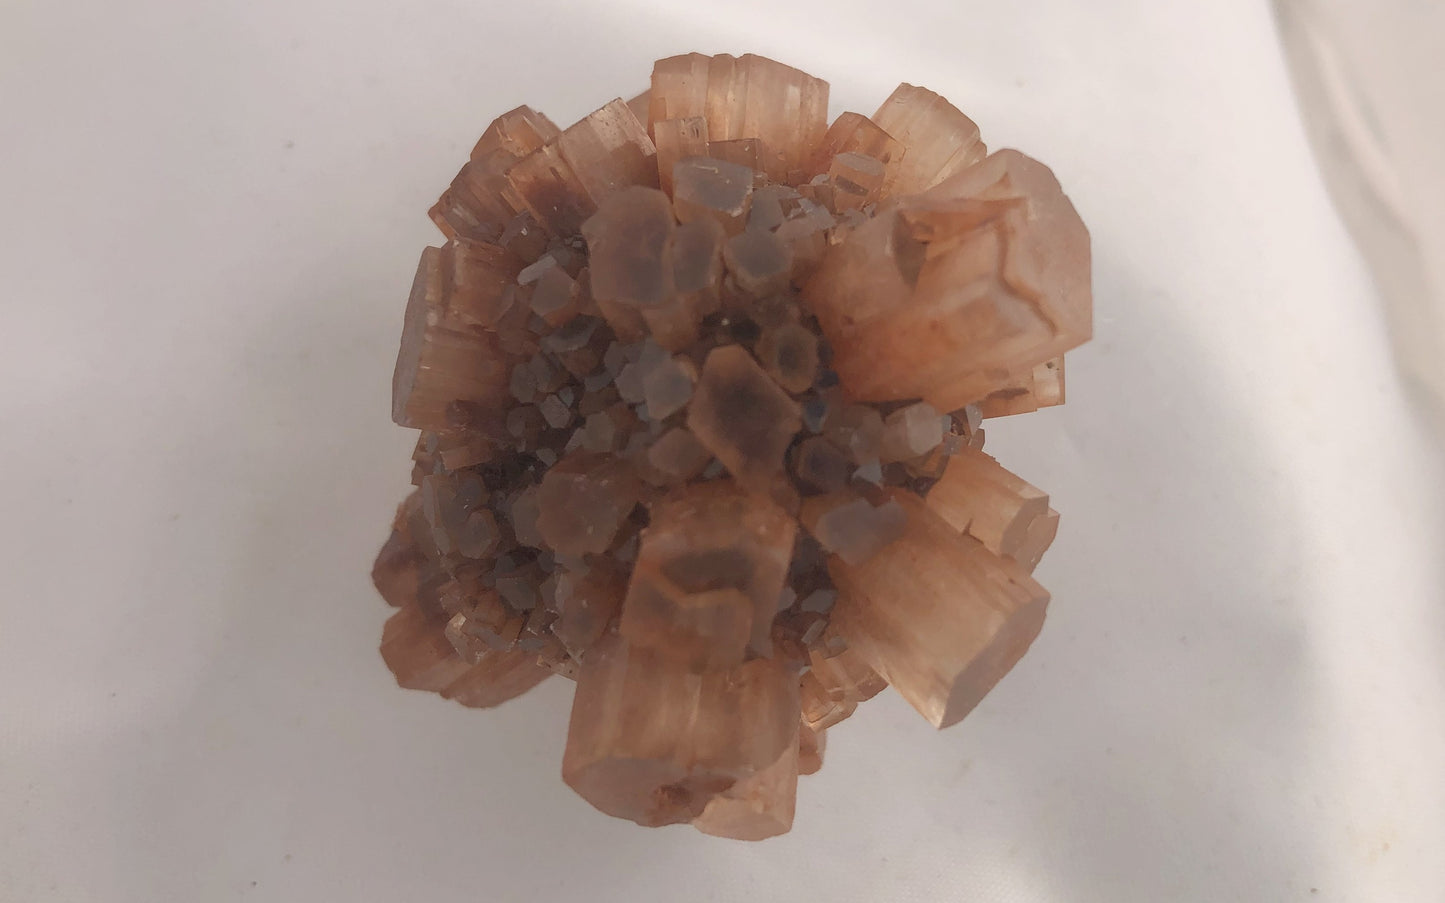 Aragonite Cluster 3 - Sephrou Province, Morocco | Of Coins & Crystals